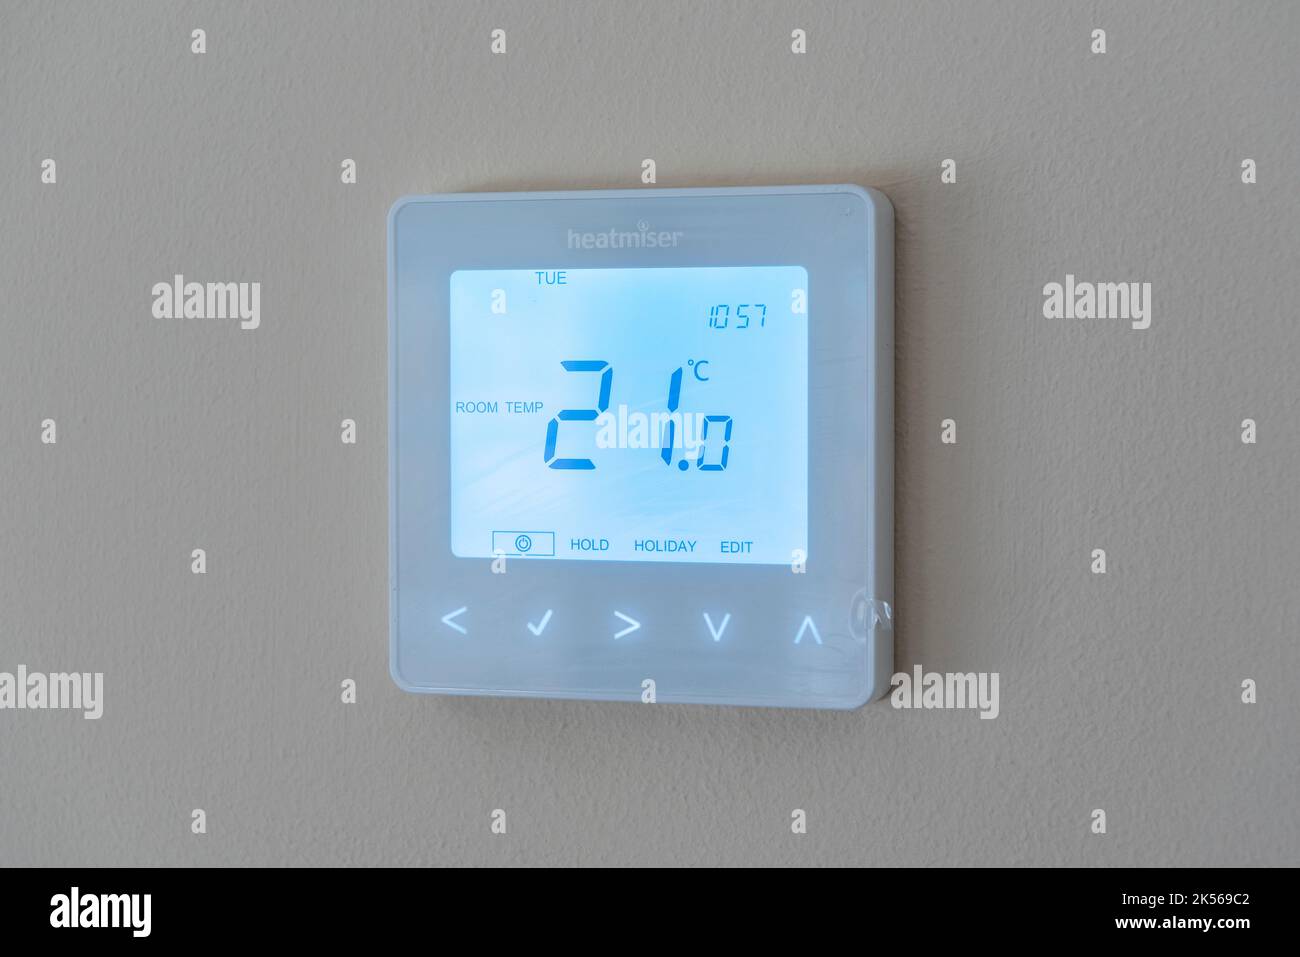 Air source heat pump room thermostat Stock Photo